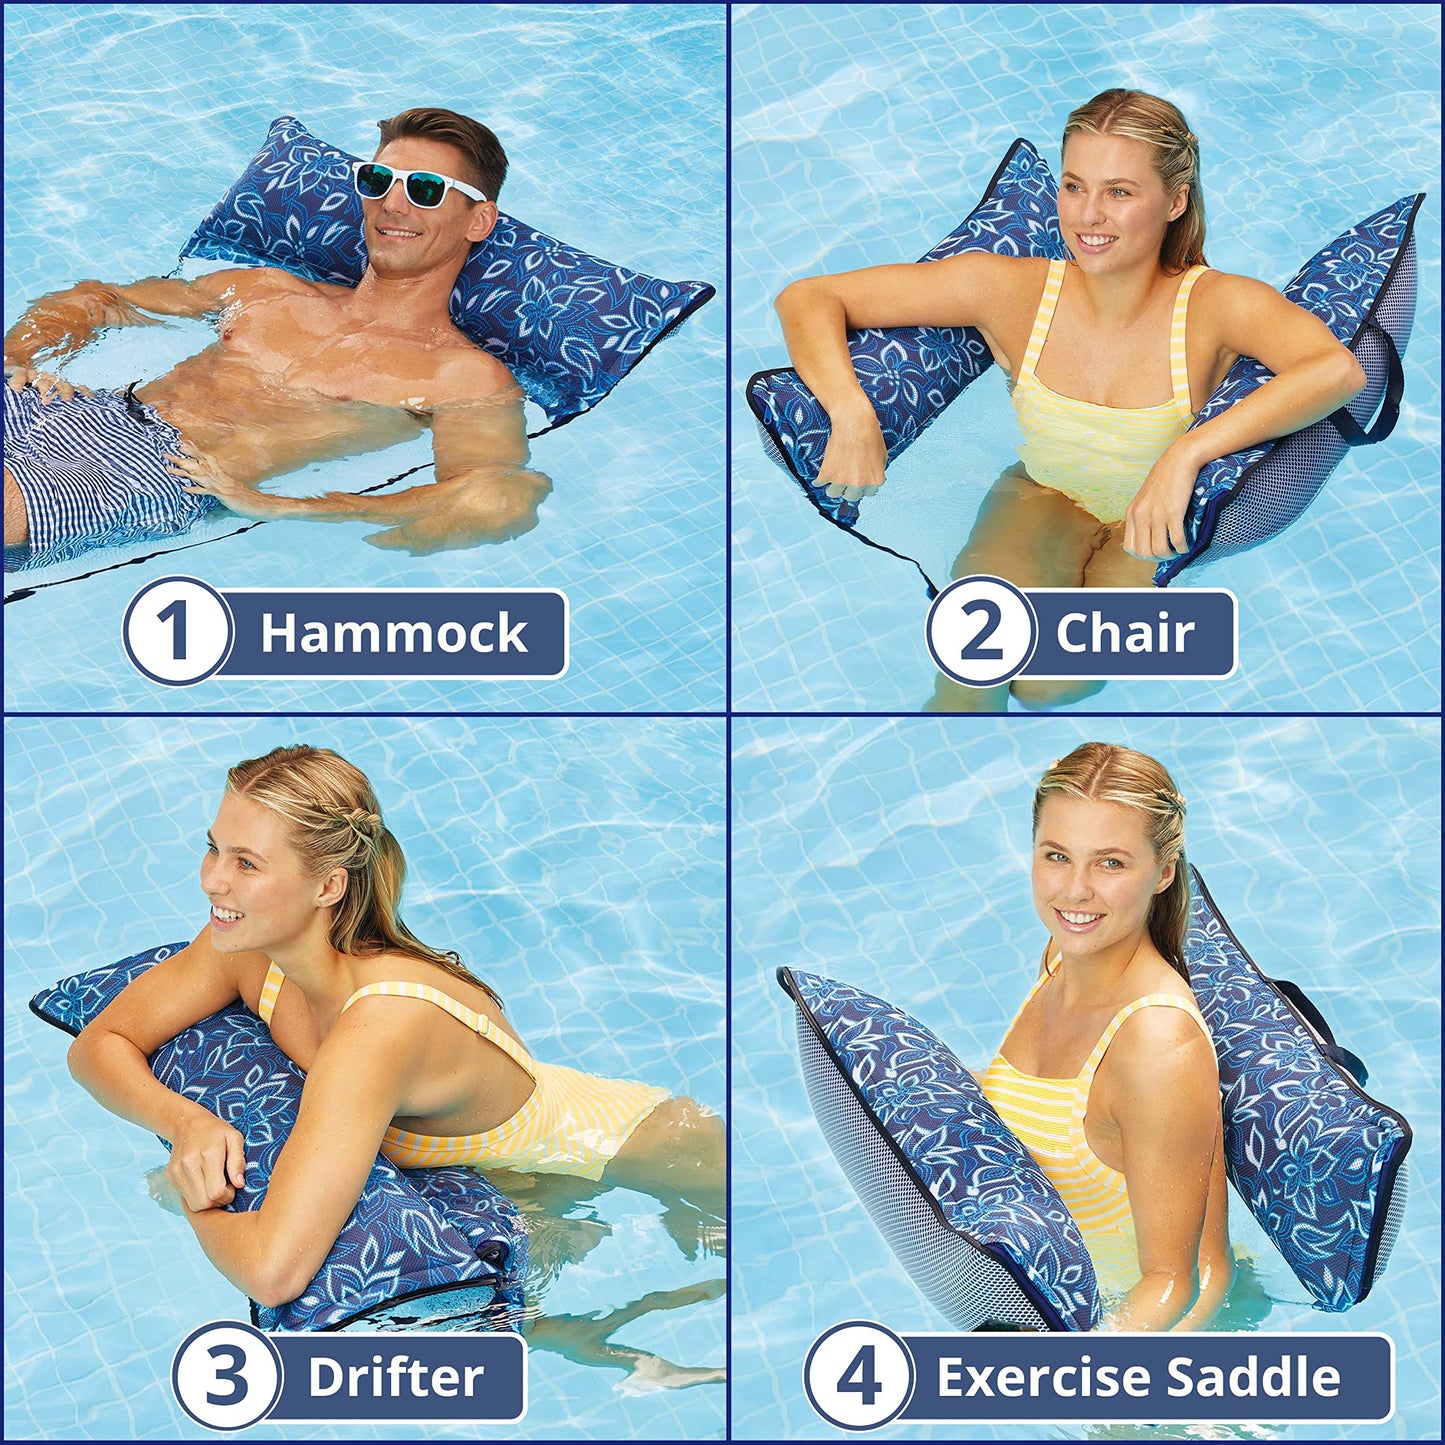 Aqua Original 4-in-1 Monterey Hammock Pool Float & Water Hammock – Multi-Purpose, Inflatable Pool Floats for Adults – Patented Thick, Non-Stick PVC Material Supreme Hammock - Blue Orchid